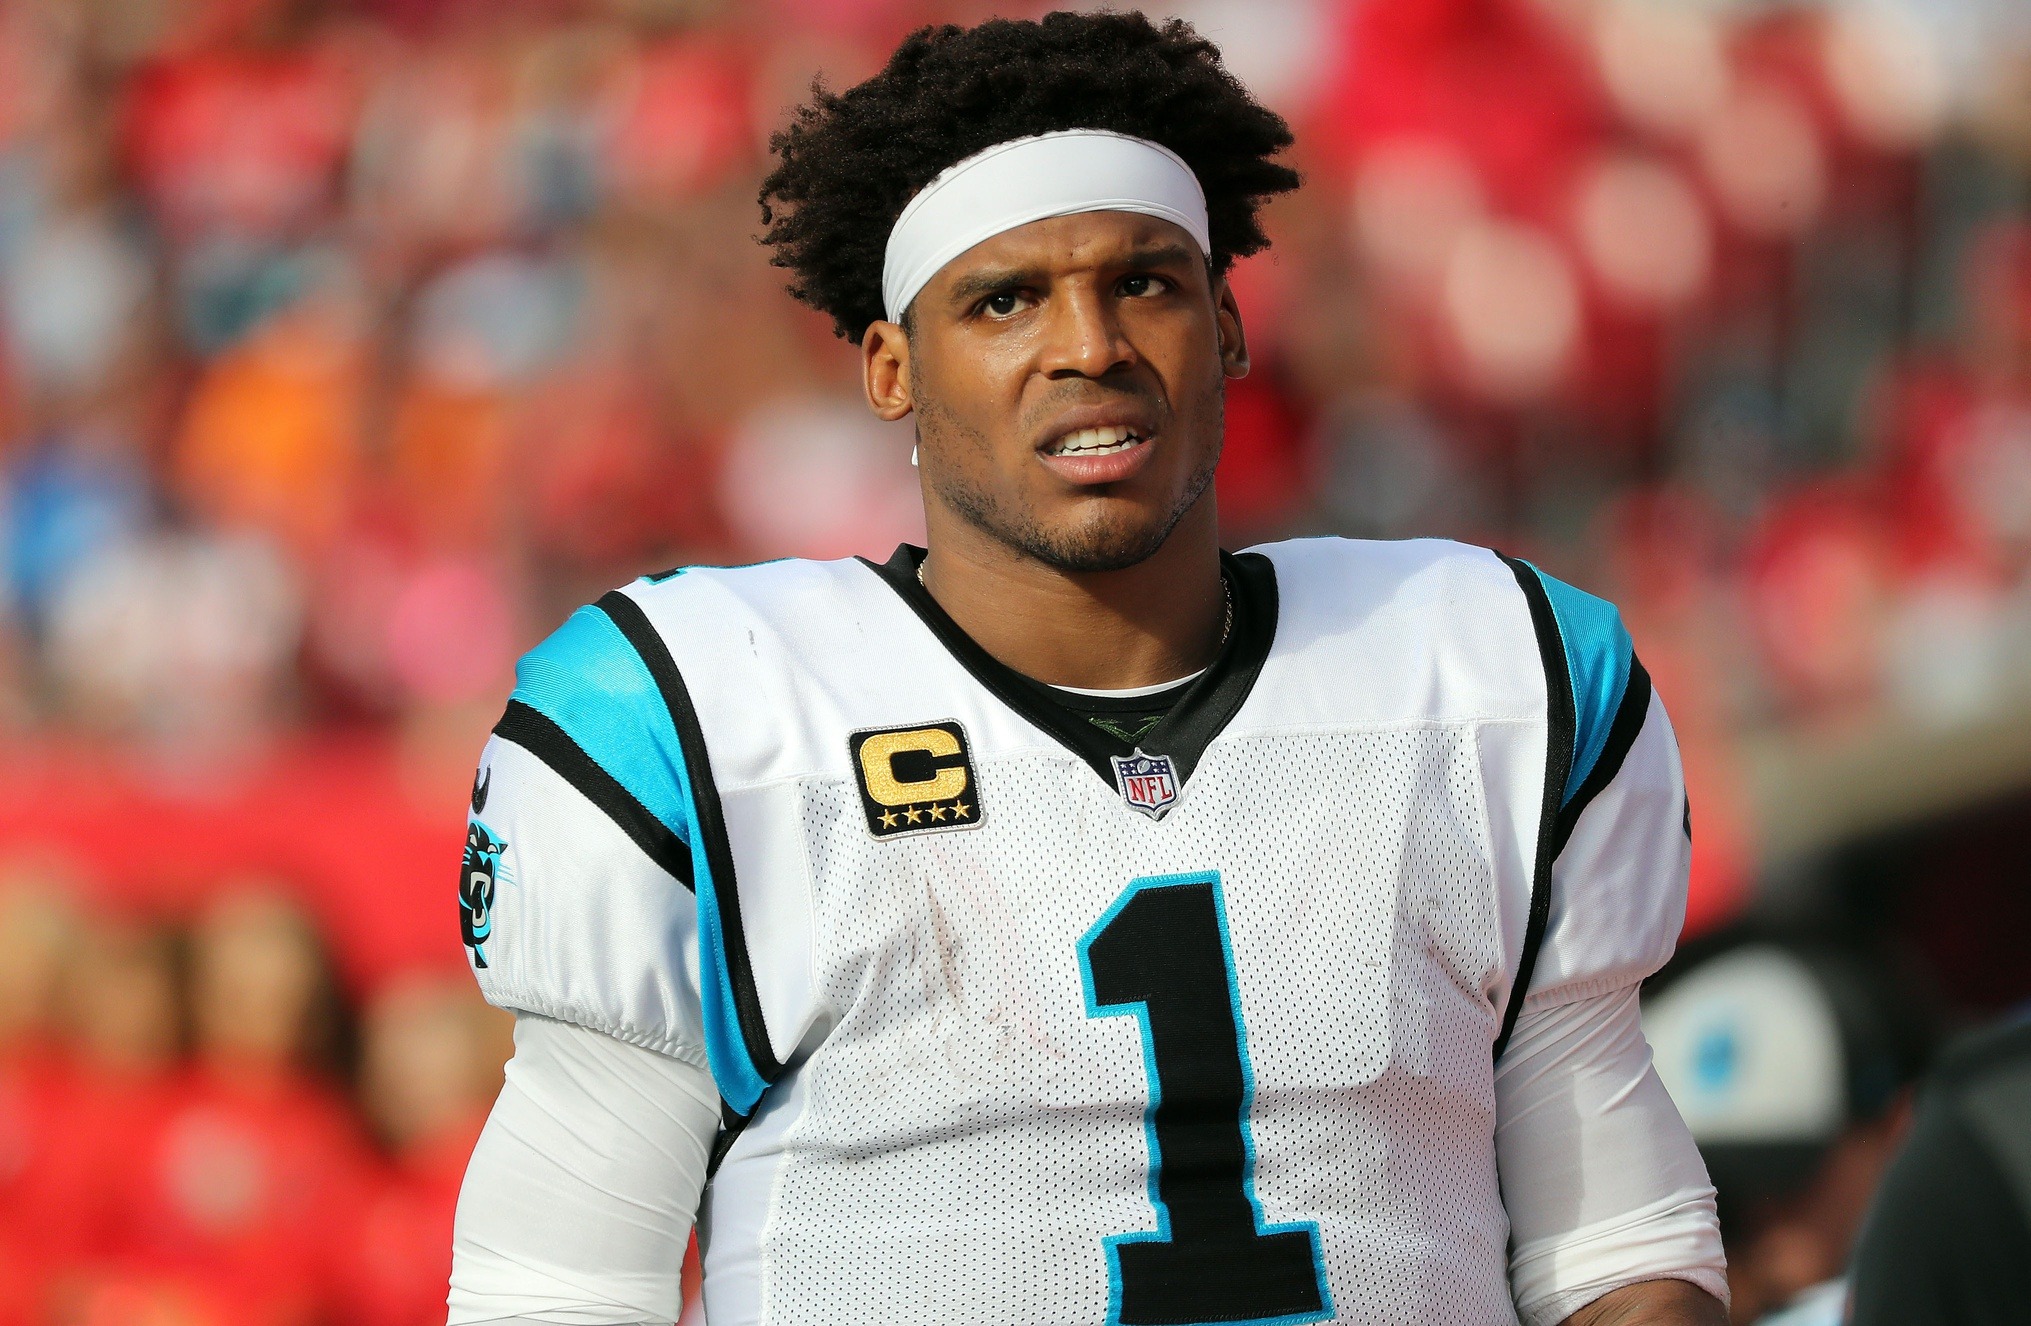 NFC South Stars Julio Jones, Cam Newton Ready to Bounce Back from Injuries